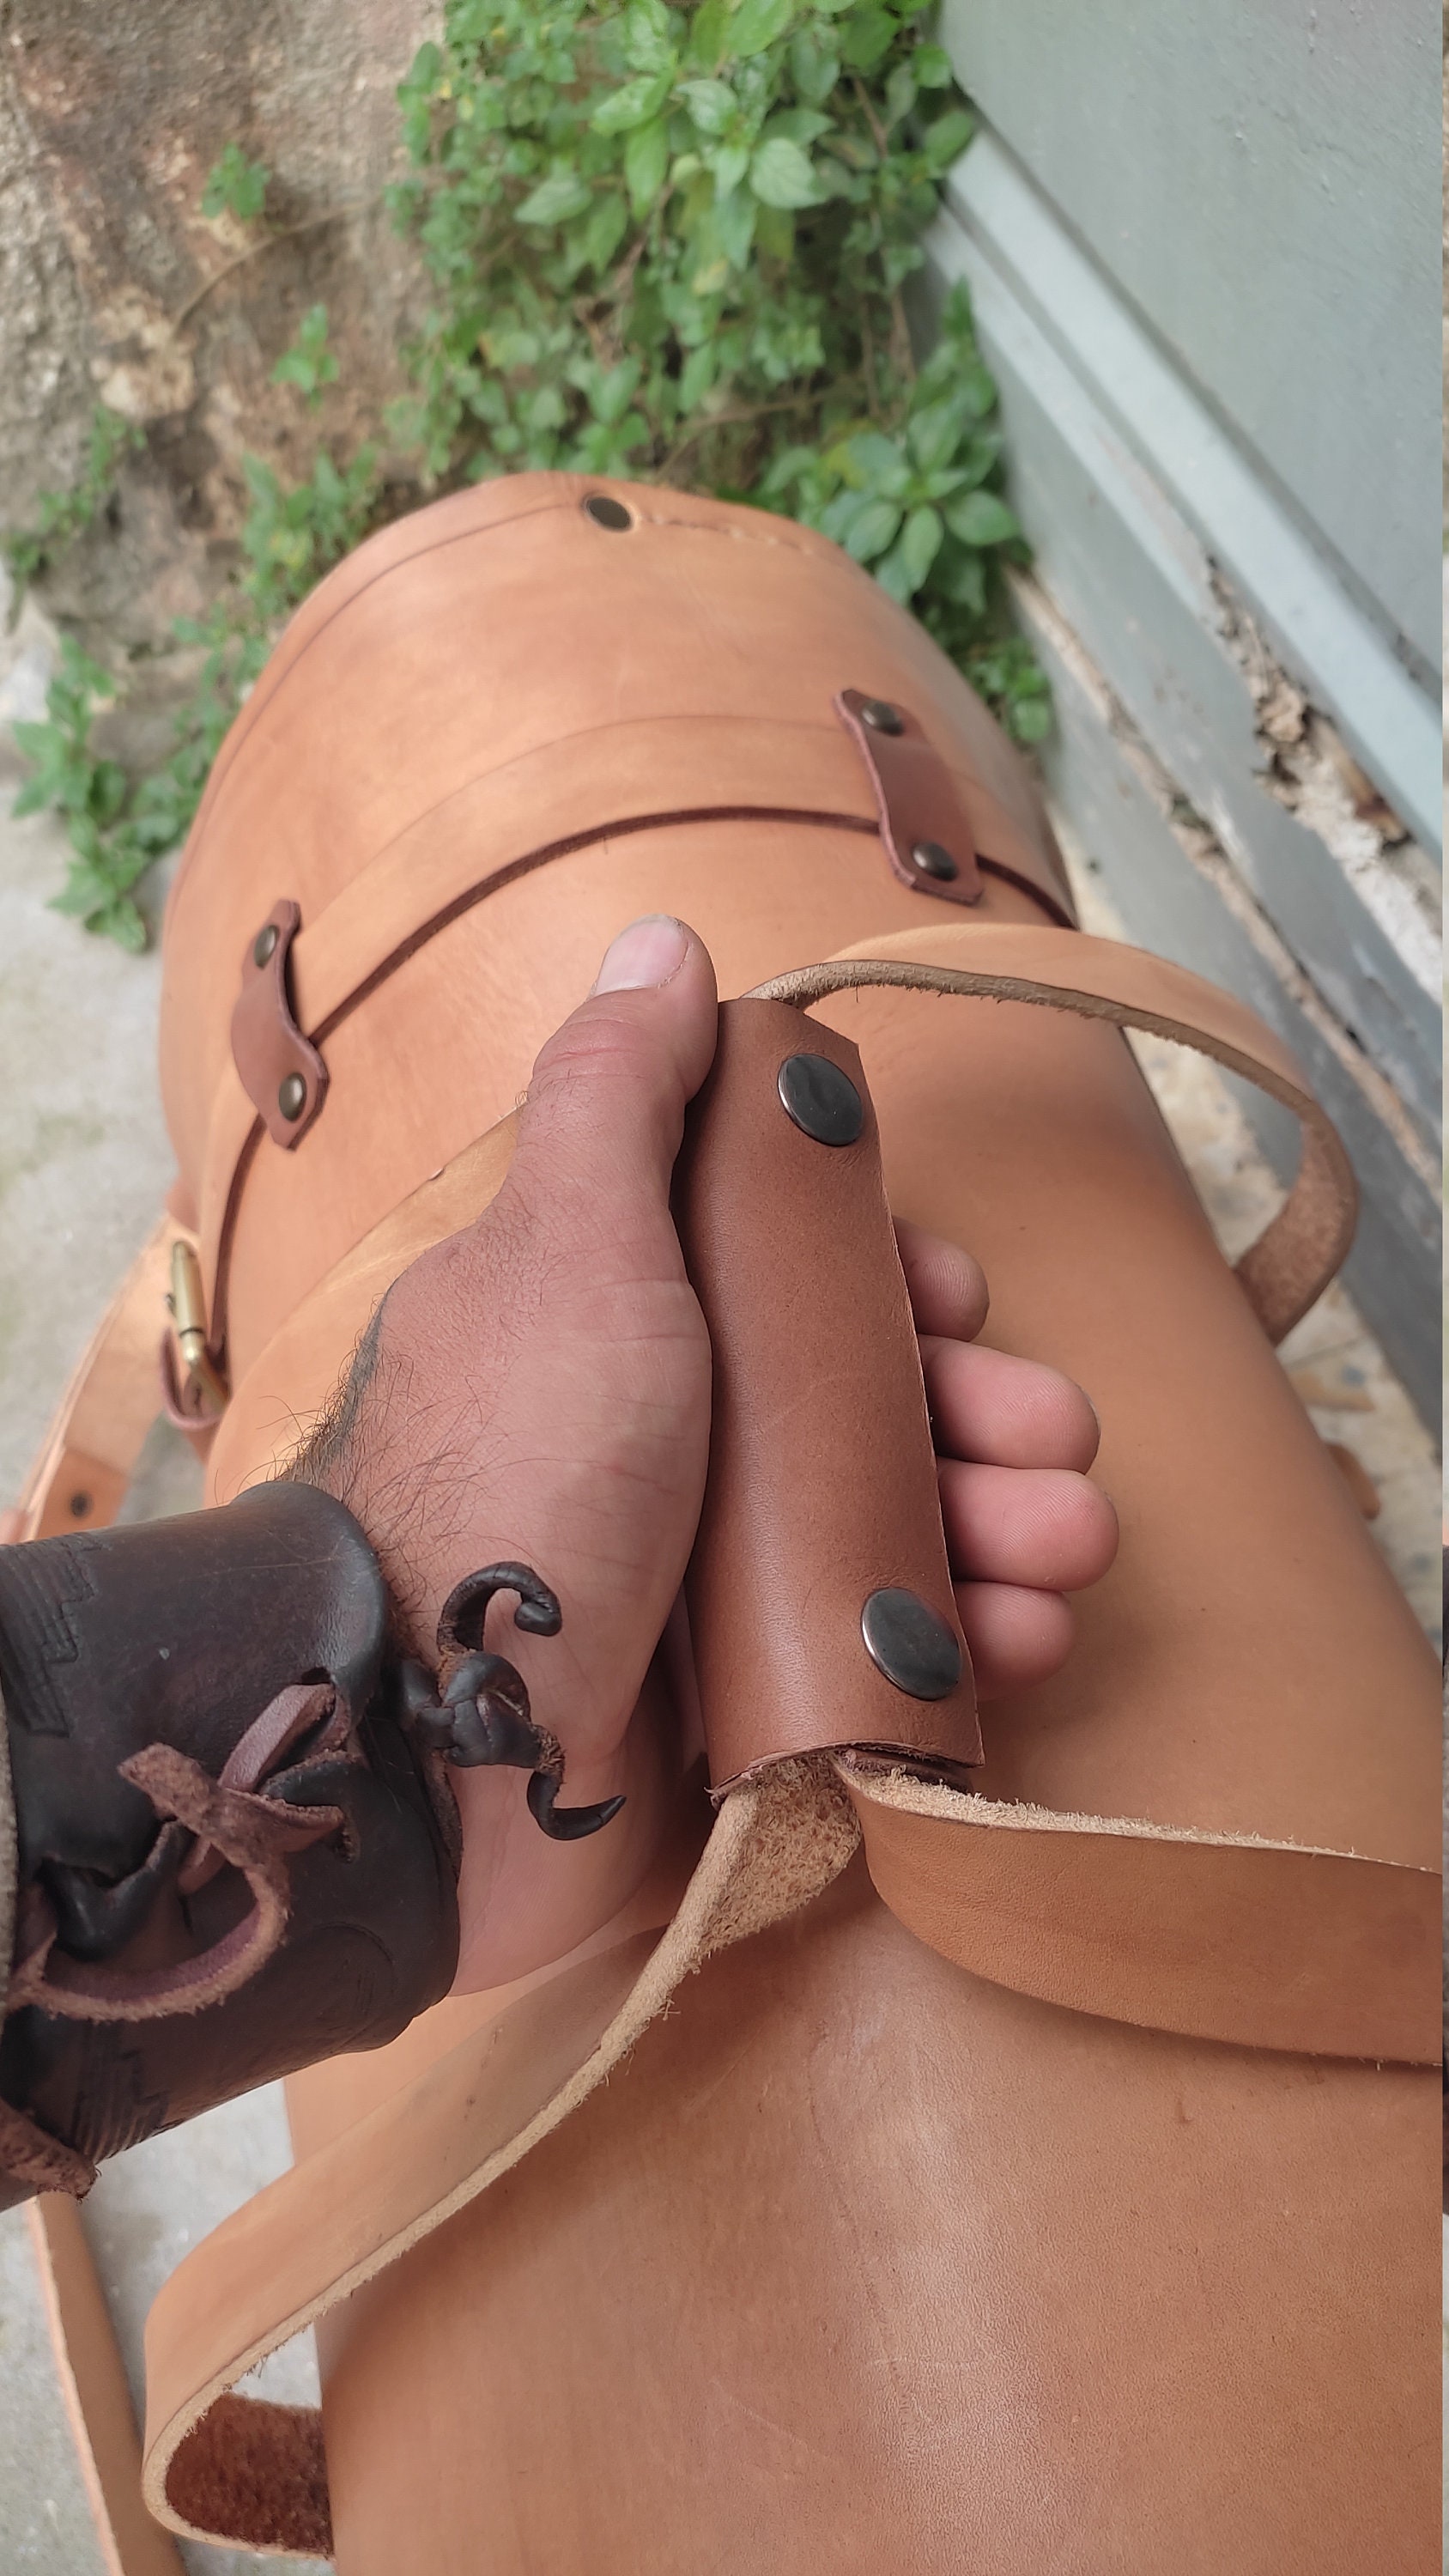 Leather Motorcycle Duffle Bag — The Handmade Store